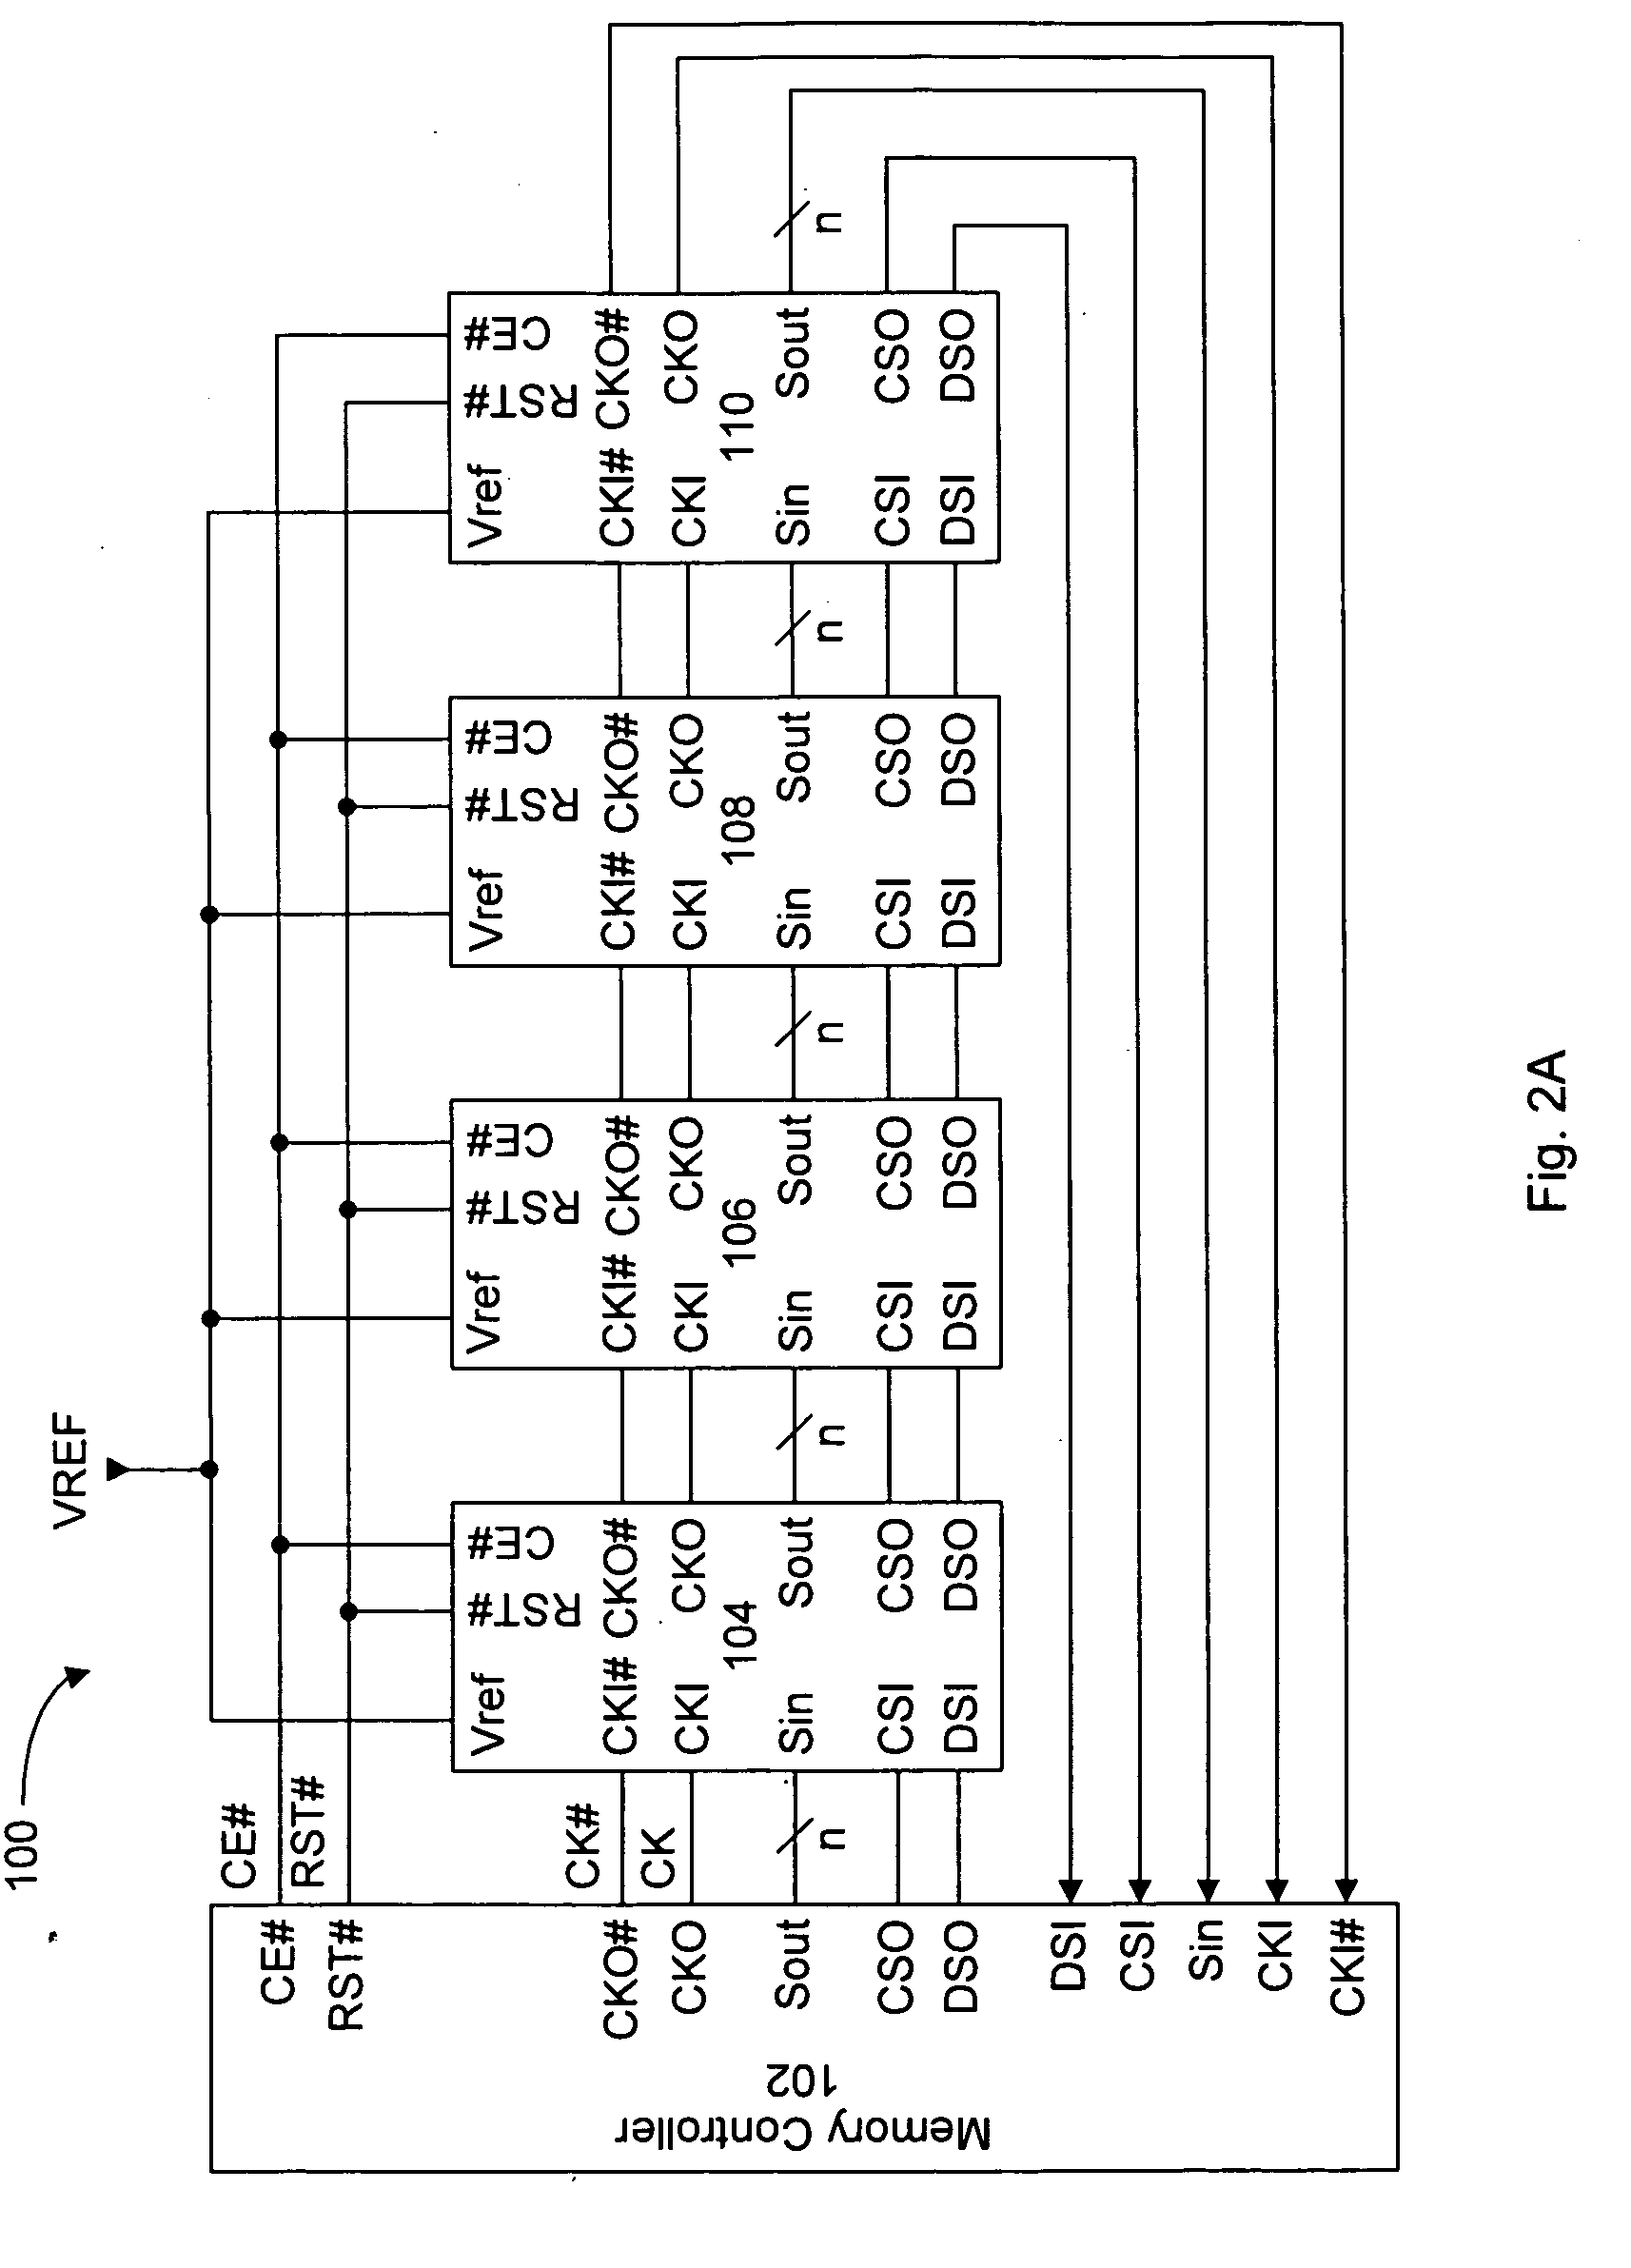 Error detection method and a system including one or more memory devices